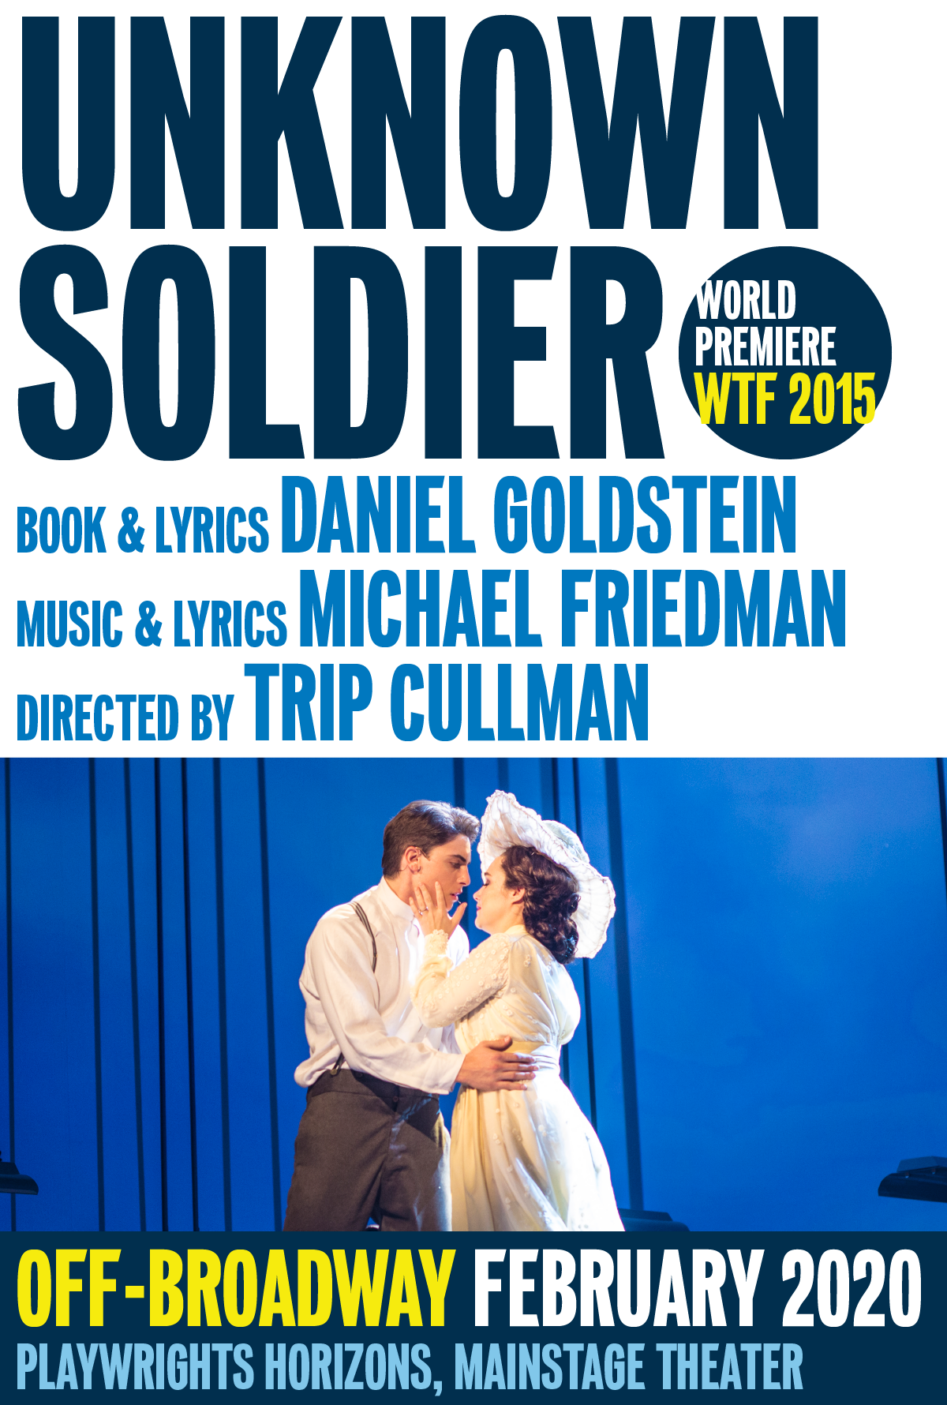 Unknown Soldier, books & lyrics by Daniel Goldstein, music & lyrics by Michael Friedman, directed by Trip Cullman, Off-Broadway February 2020, Playwrights Horizons, Mainstage Theater.